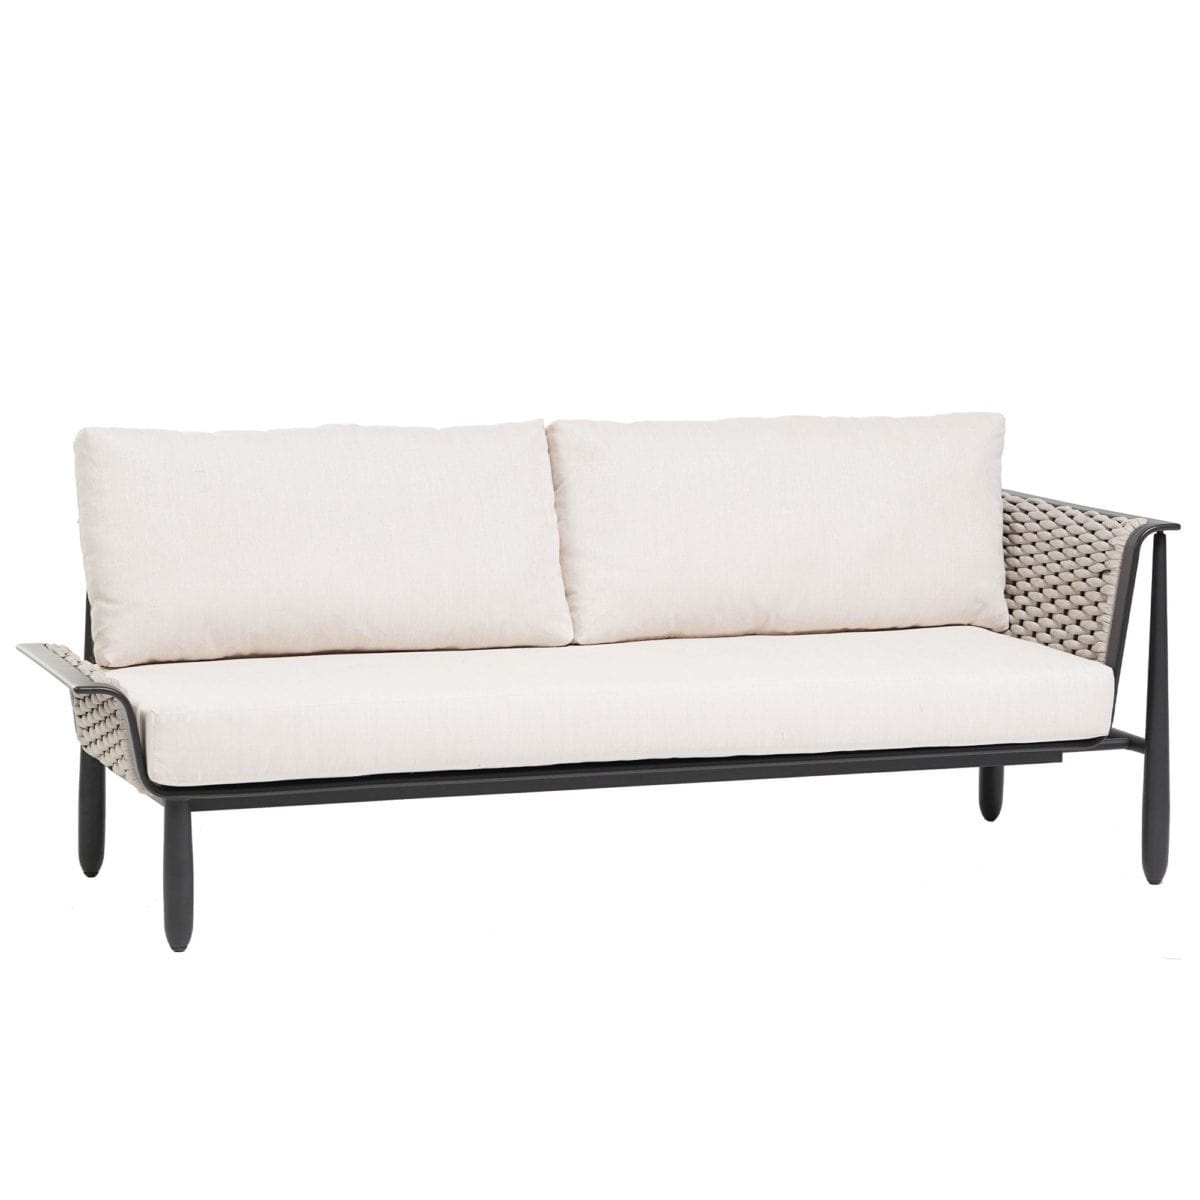 Ratana Sectional Diva 3-Seater Right Arm